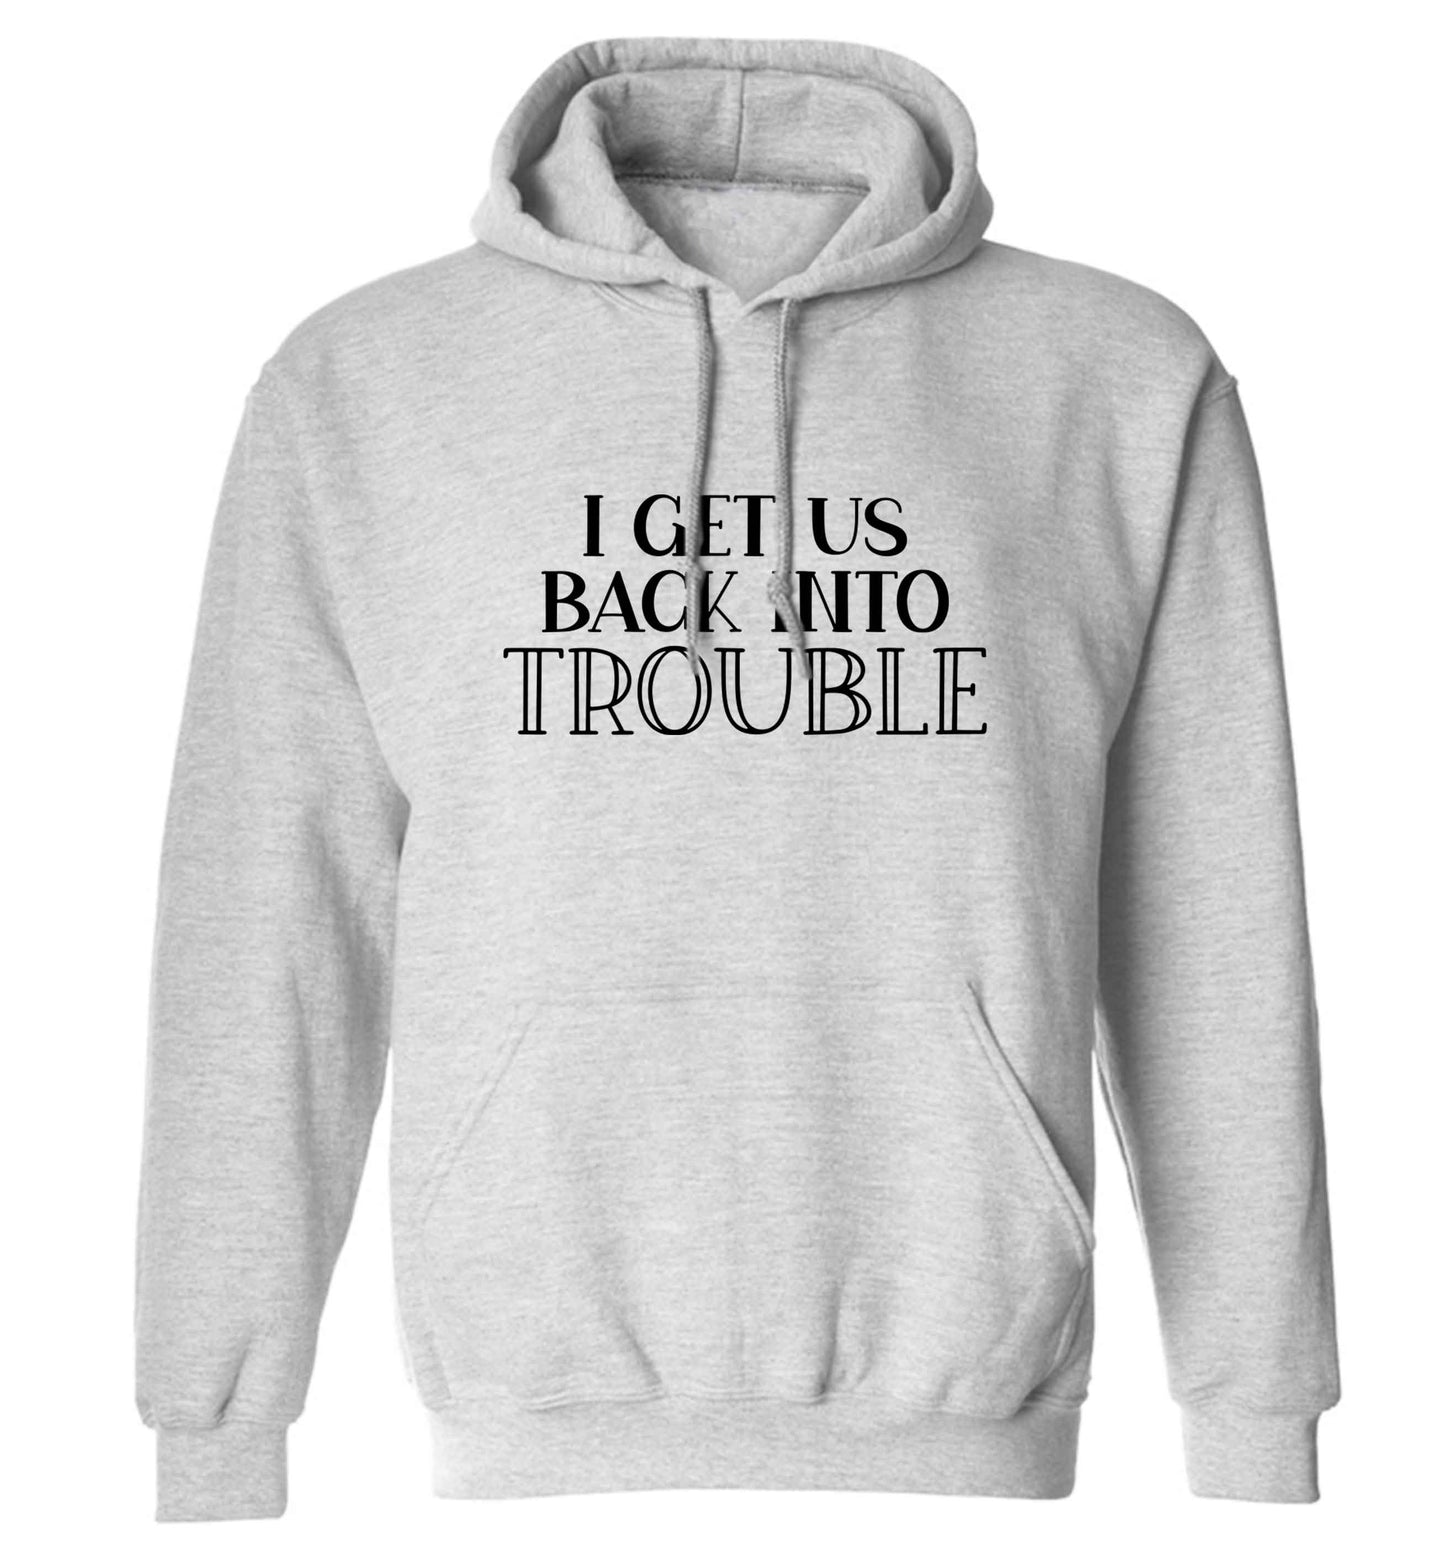 I get us back into trouble adults unisex grey hoodie 2XL